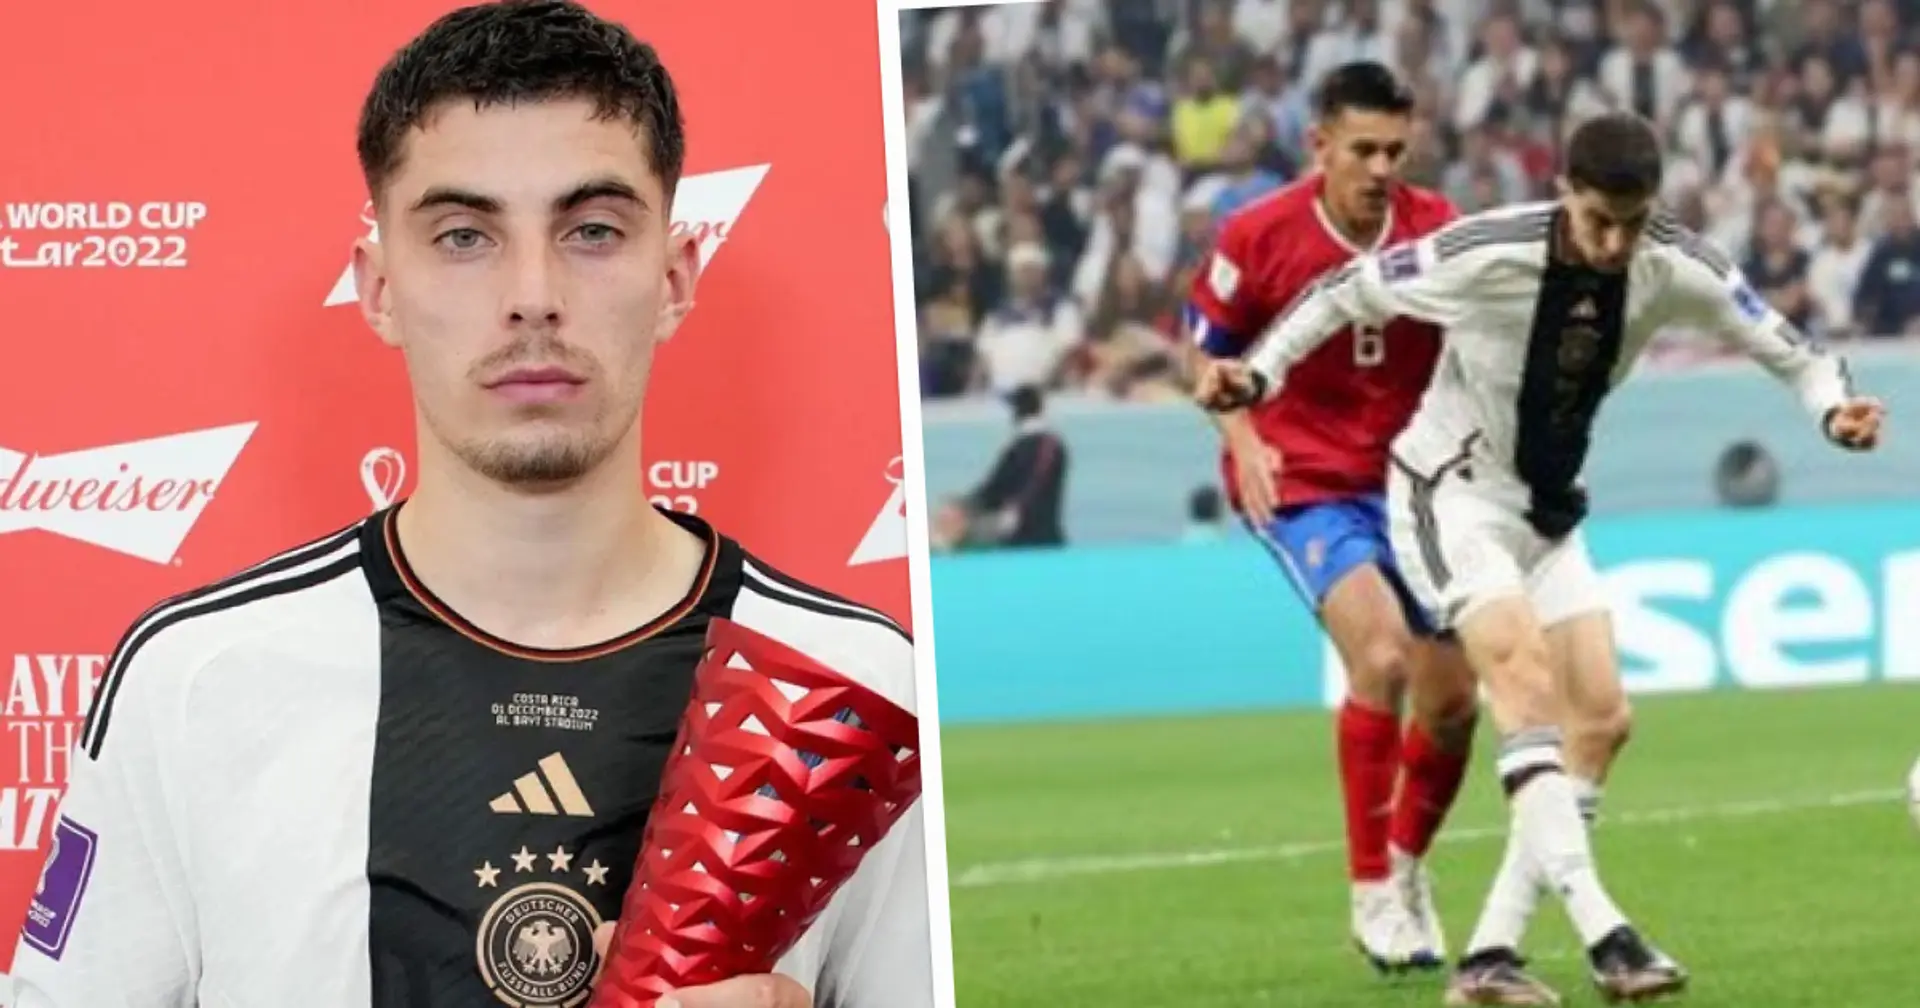 Havertz wins 5th Man of the Match Award by a Chelsea player at World Cup – looks bitter holding trophy